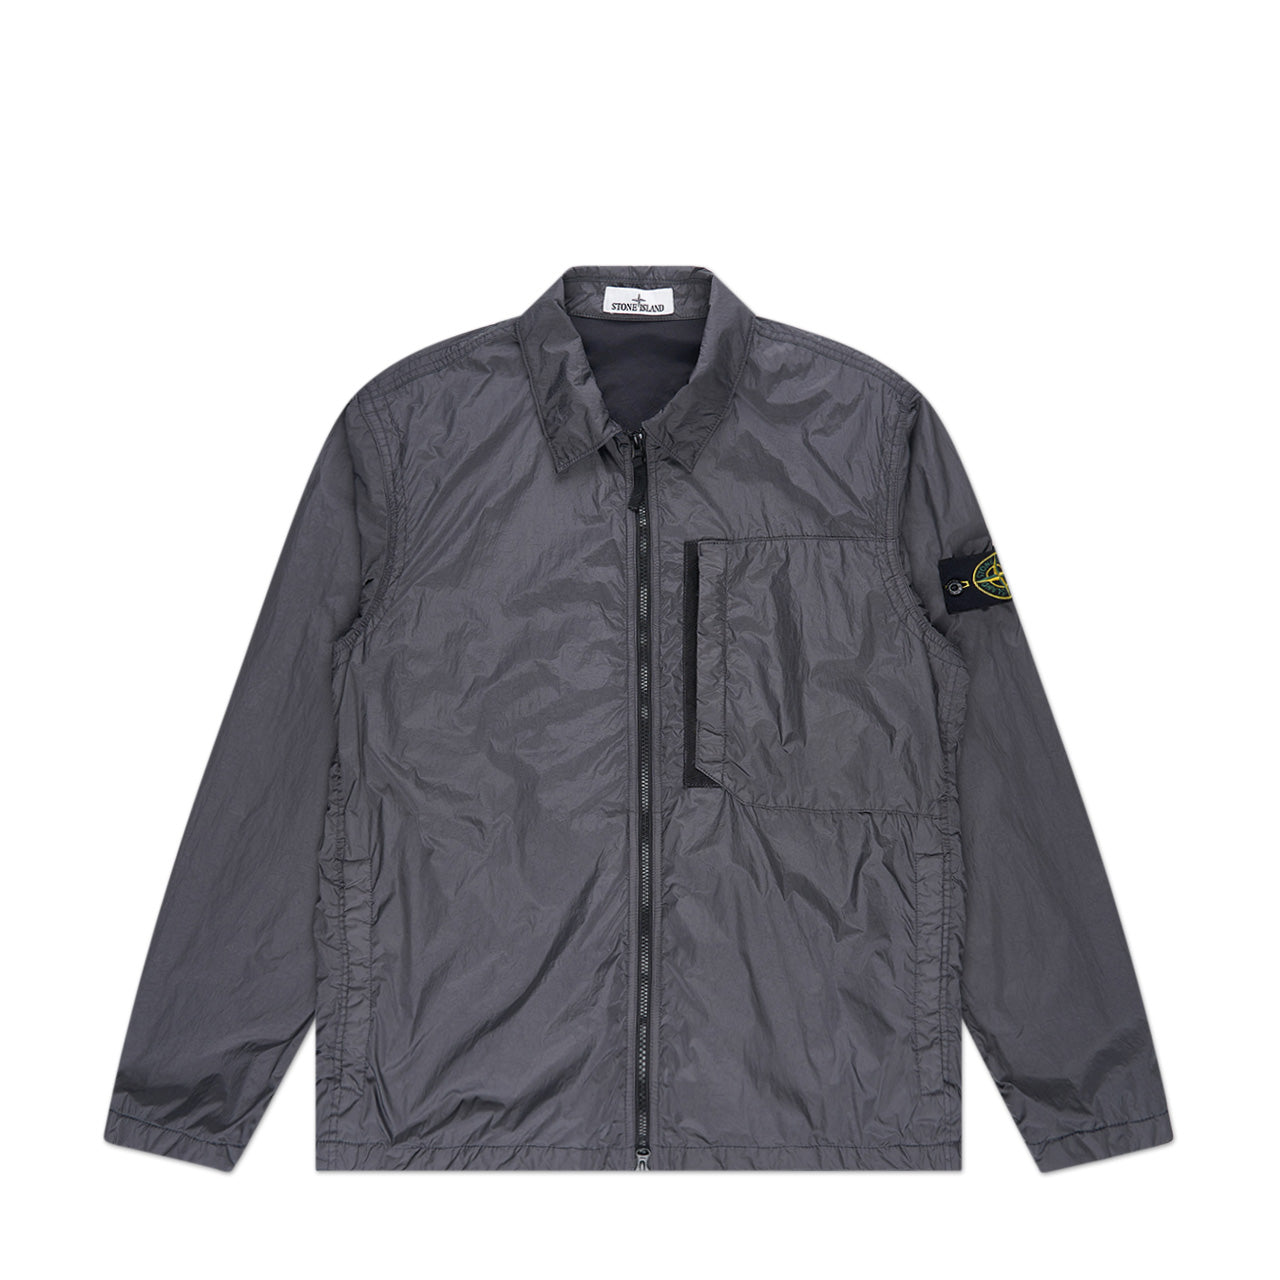 Stone Island - shop the newest collection online | a.plus Hamburg